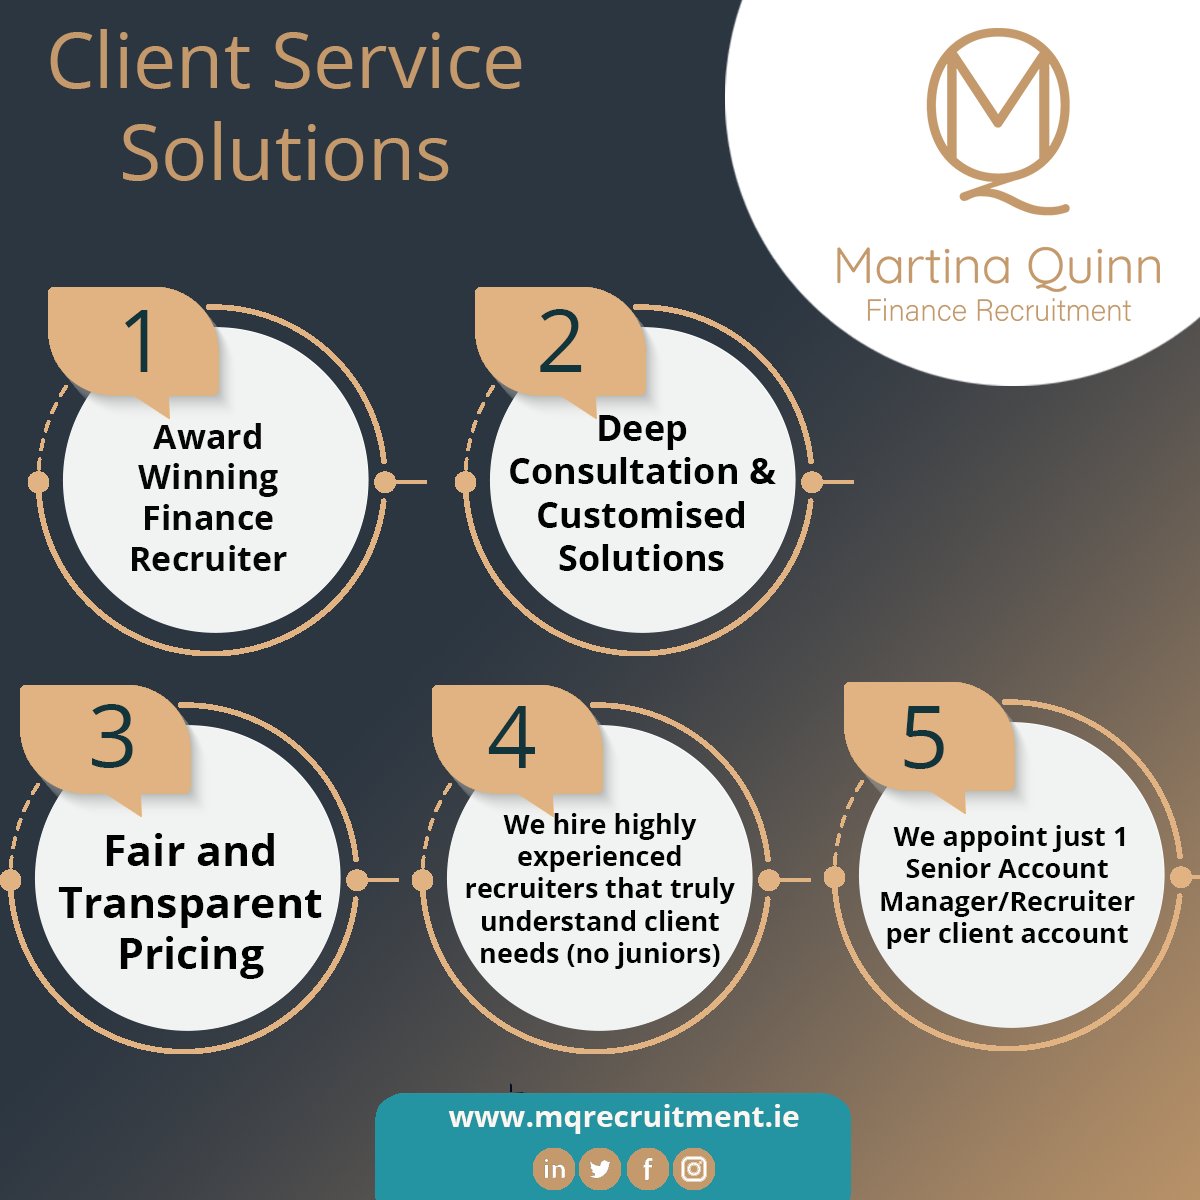 At Martina Quinn Finance Recruitment we provide client solutions to solve your recruitment needs.

#MQRecruitment #financerecruitment #solutions